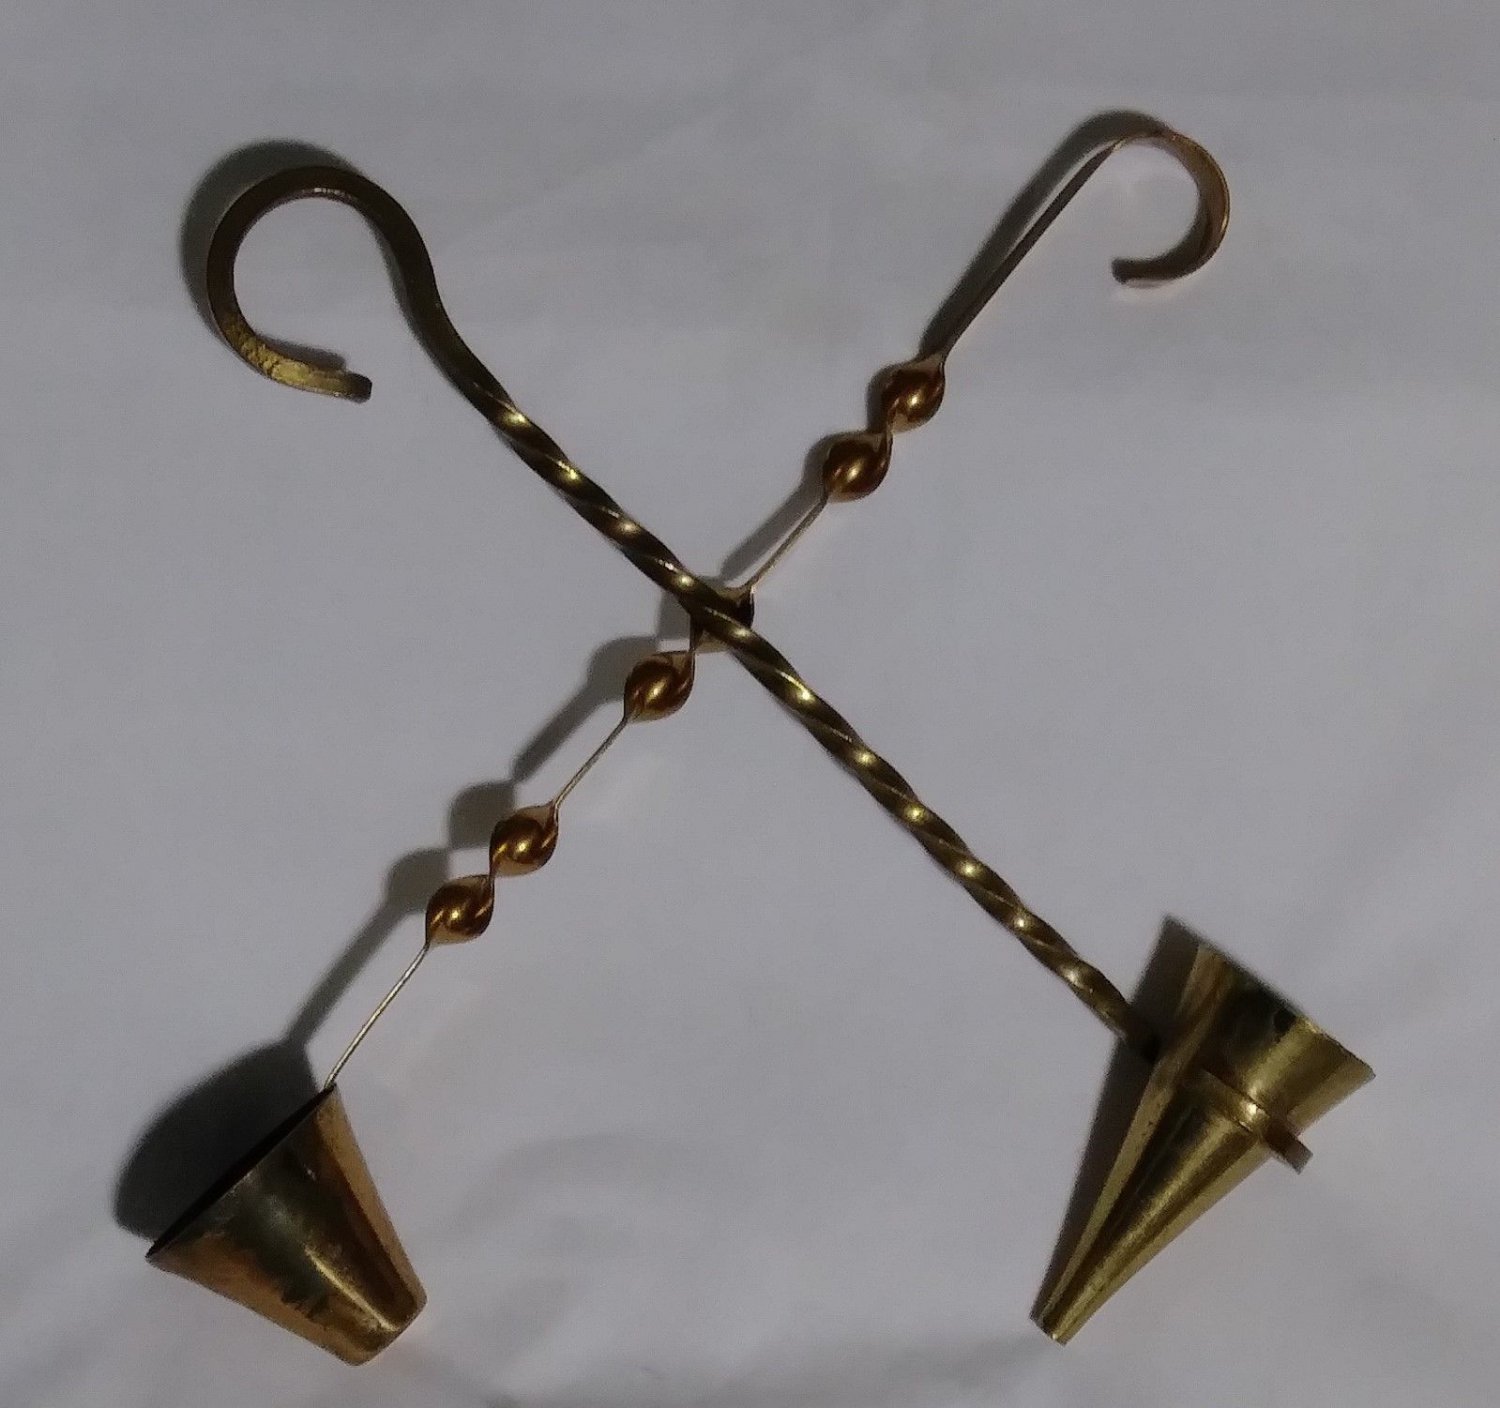 2 Vintage solid brass 8''candle snuffers Used Show Wear